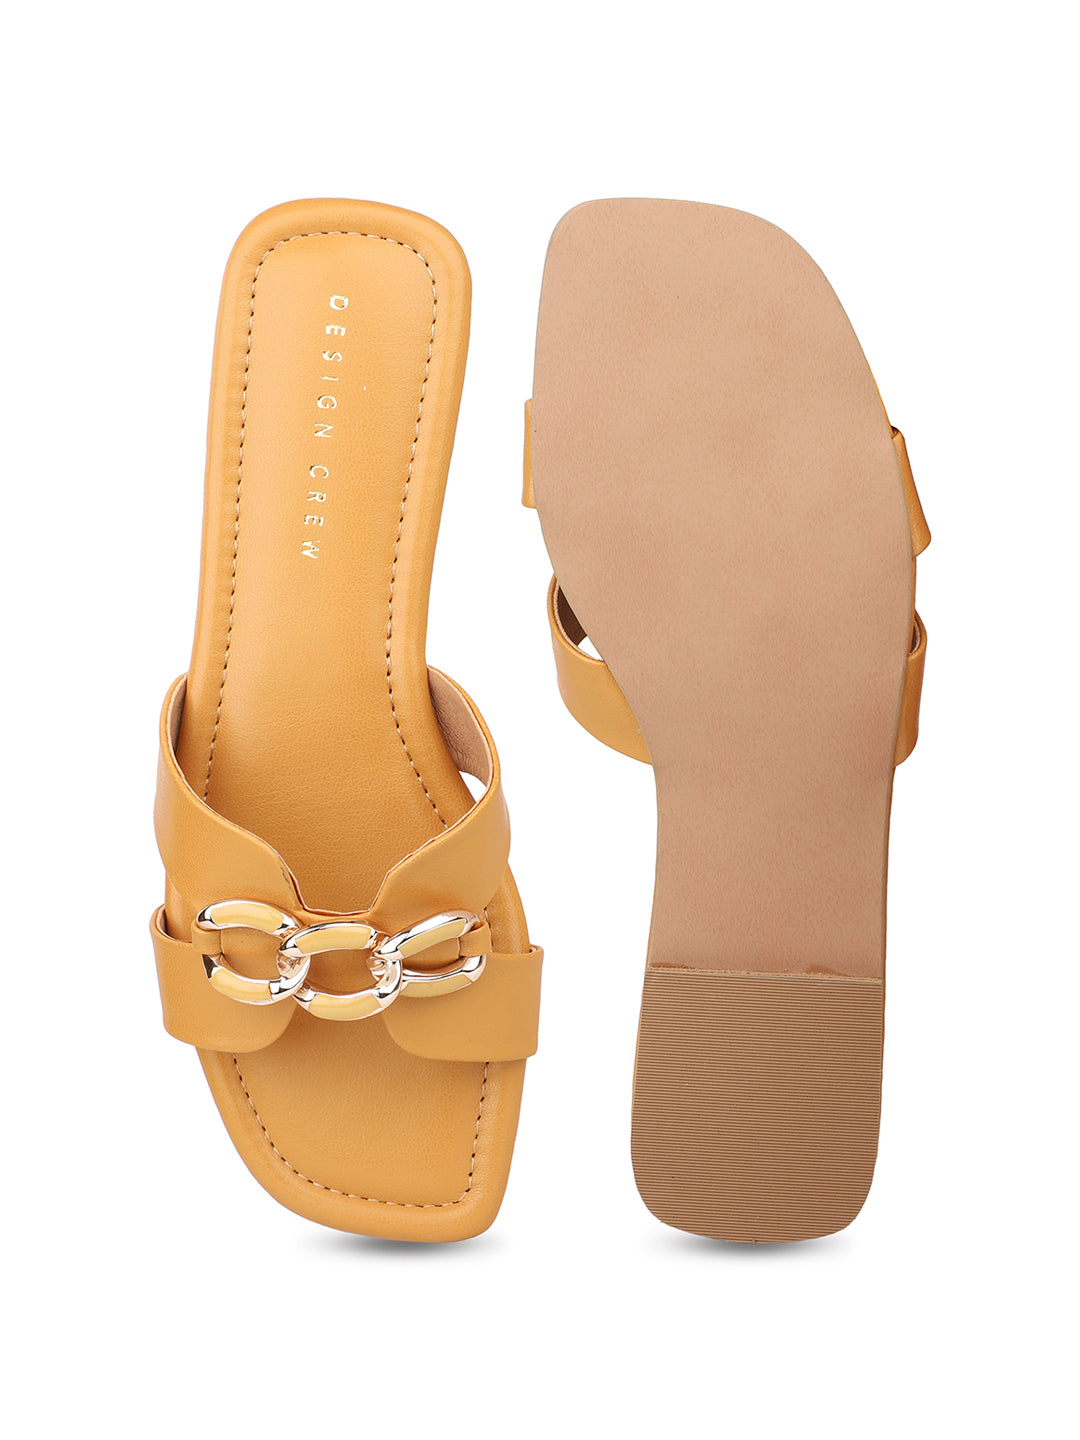 Classic H Syle Slide Sandal With Chain Detail